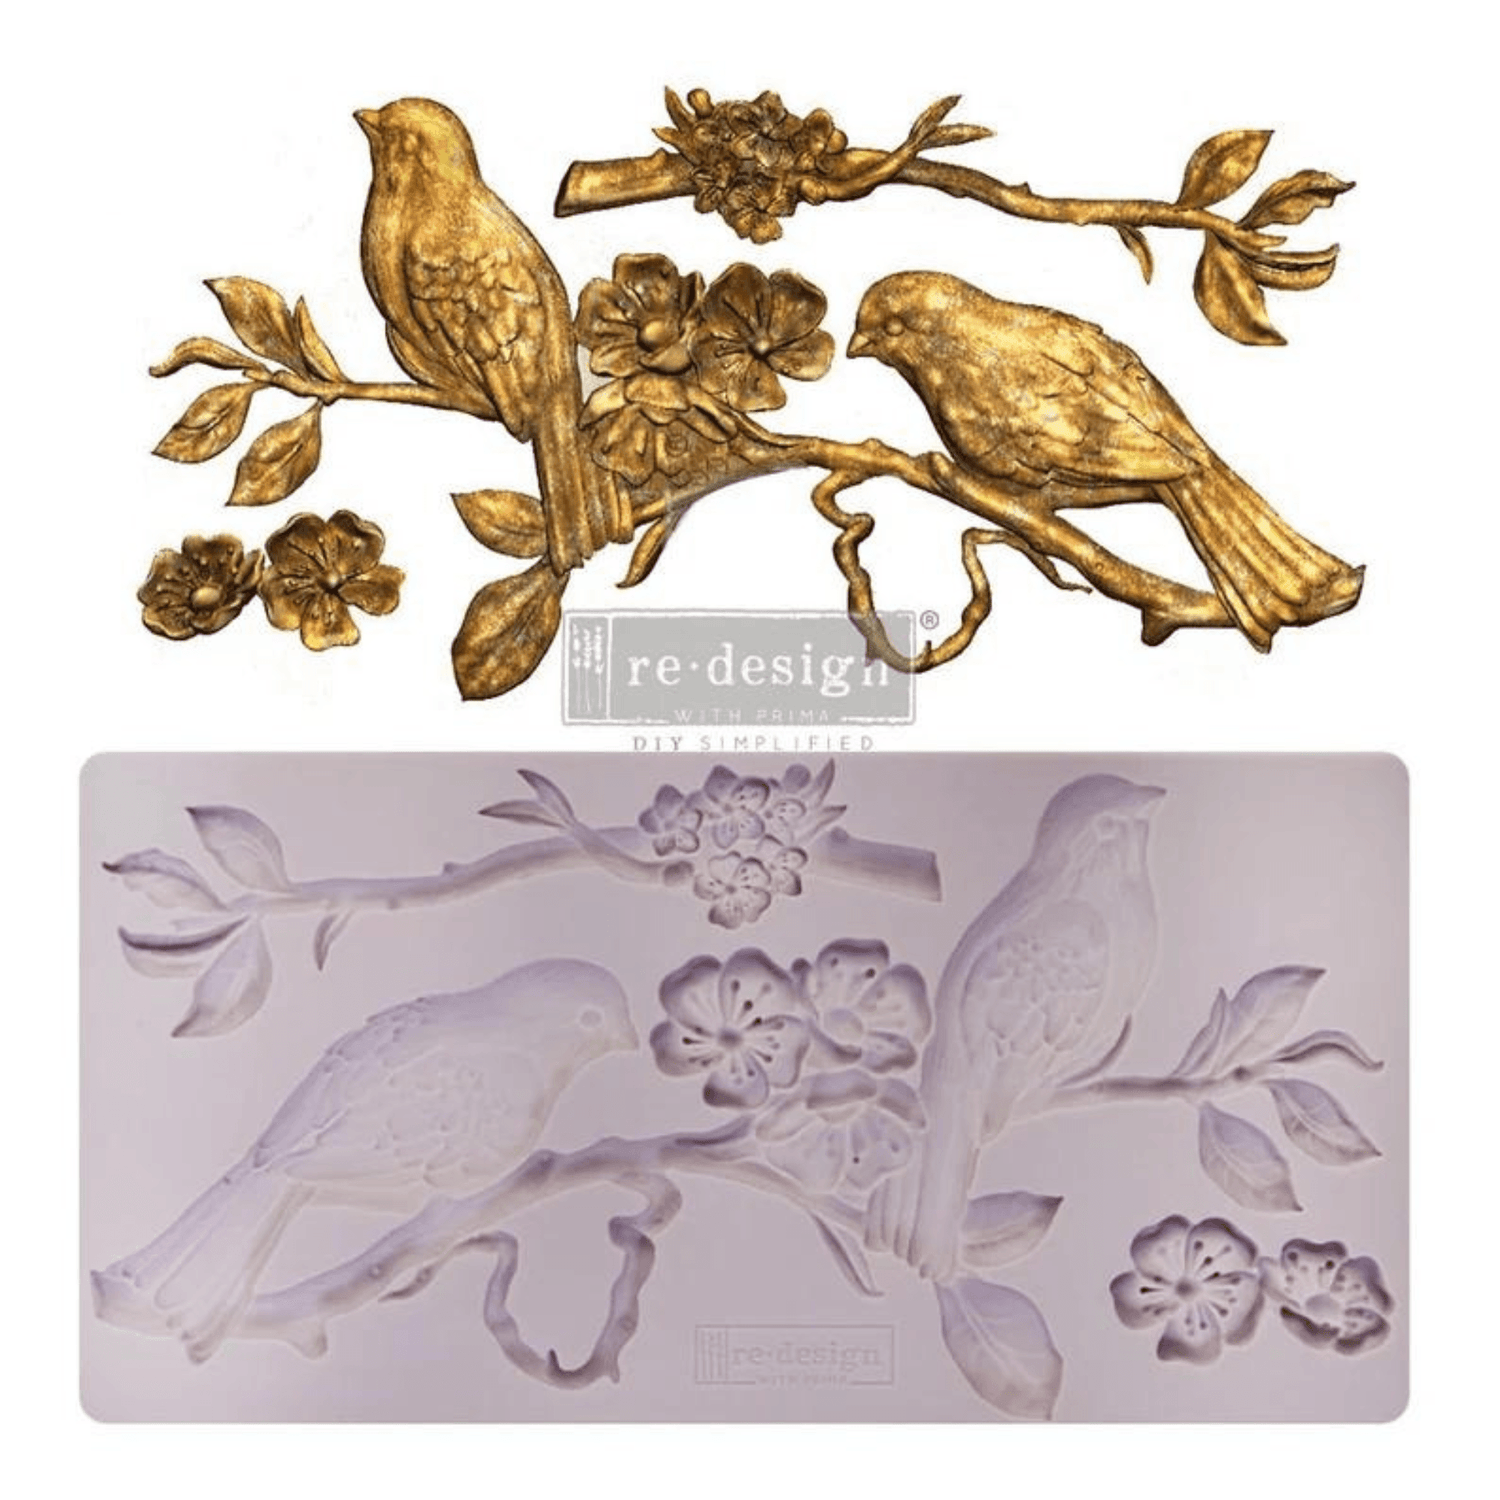 Blossoming Spring ReDesign With Prima Decor Mould - Same Day Shipping -  Furniture Moulds - Candy Mold - Molds for Resin - Clay Mold